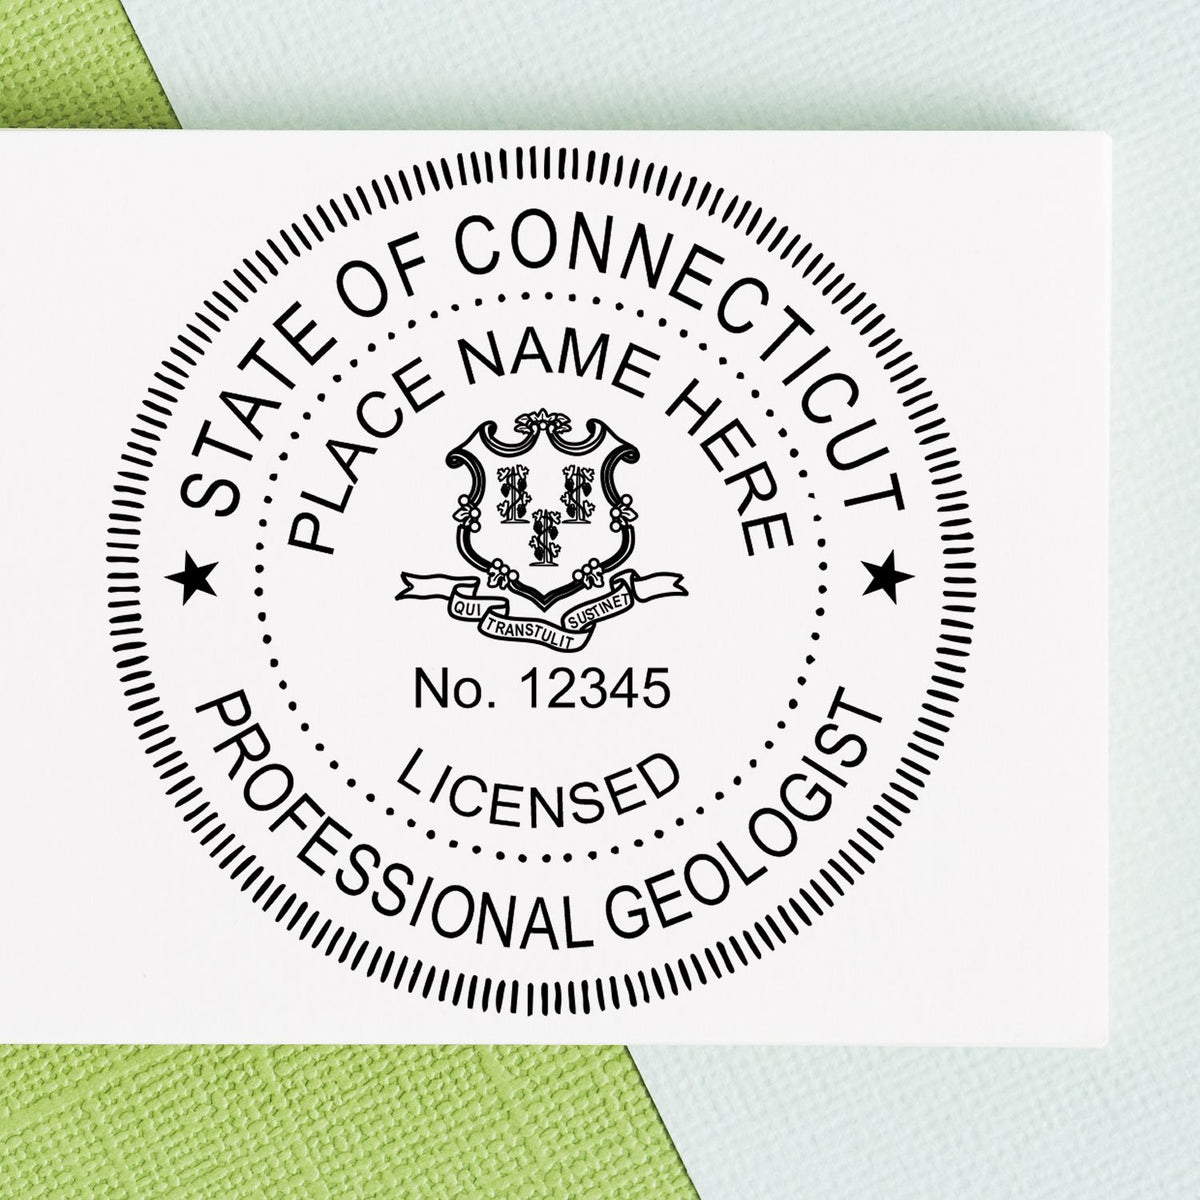 A stamped imprint of the Digital Connecticut Geologist Stamp, Electronic Seal for Connecticut Geologist in this stylish lifestyle photo, setting the tone for a unique and personalized product.